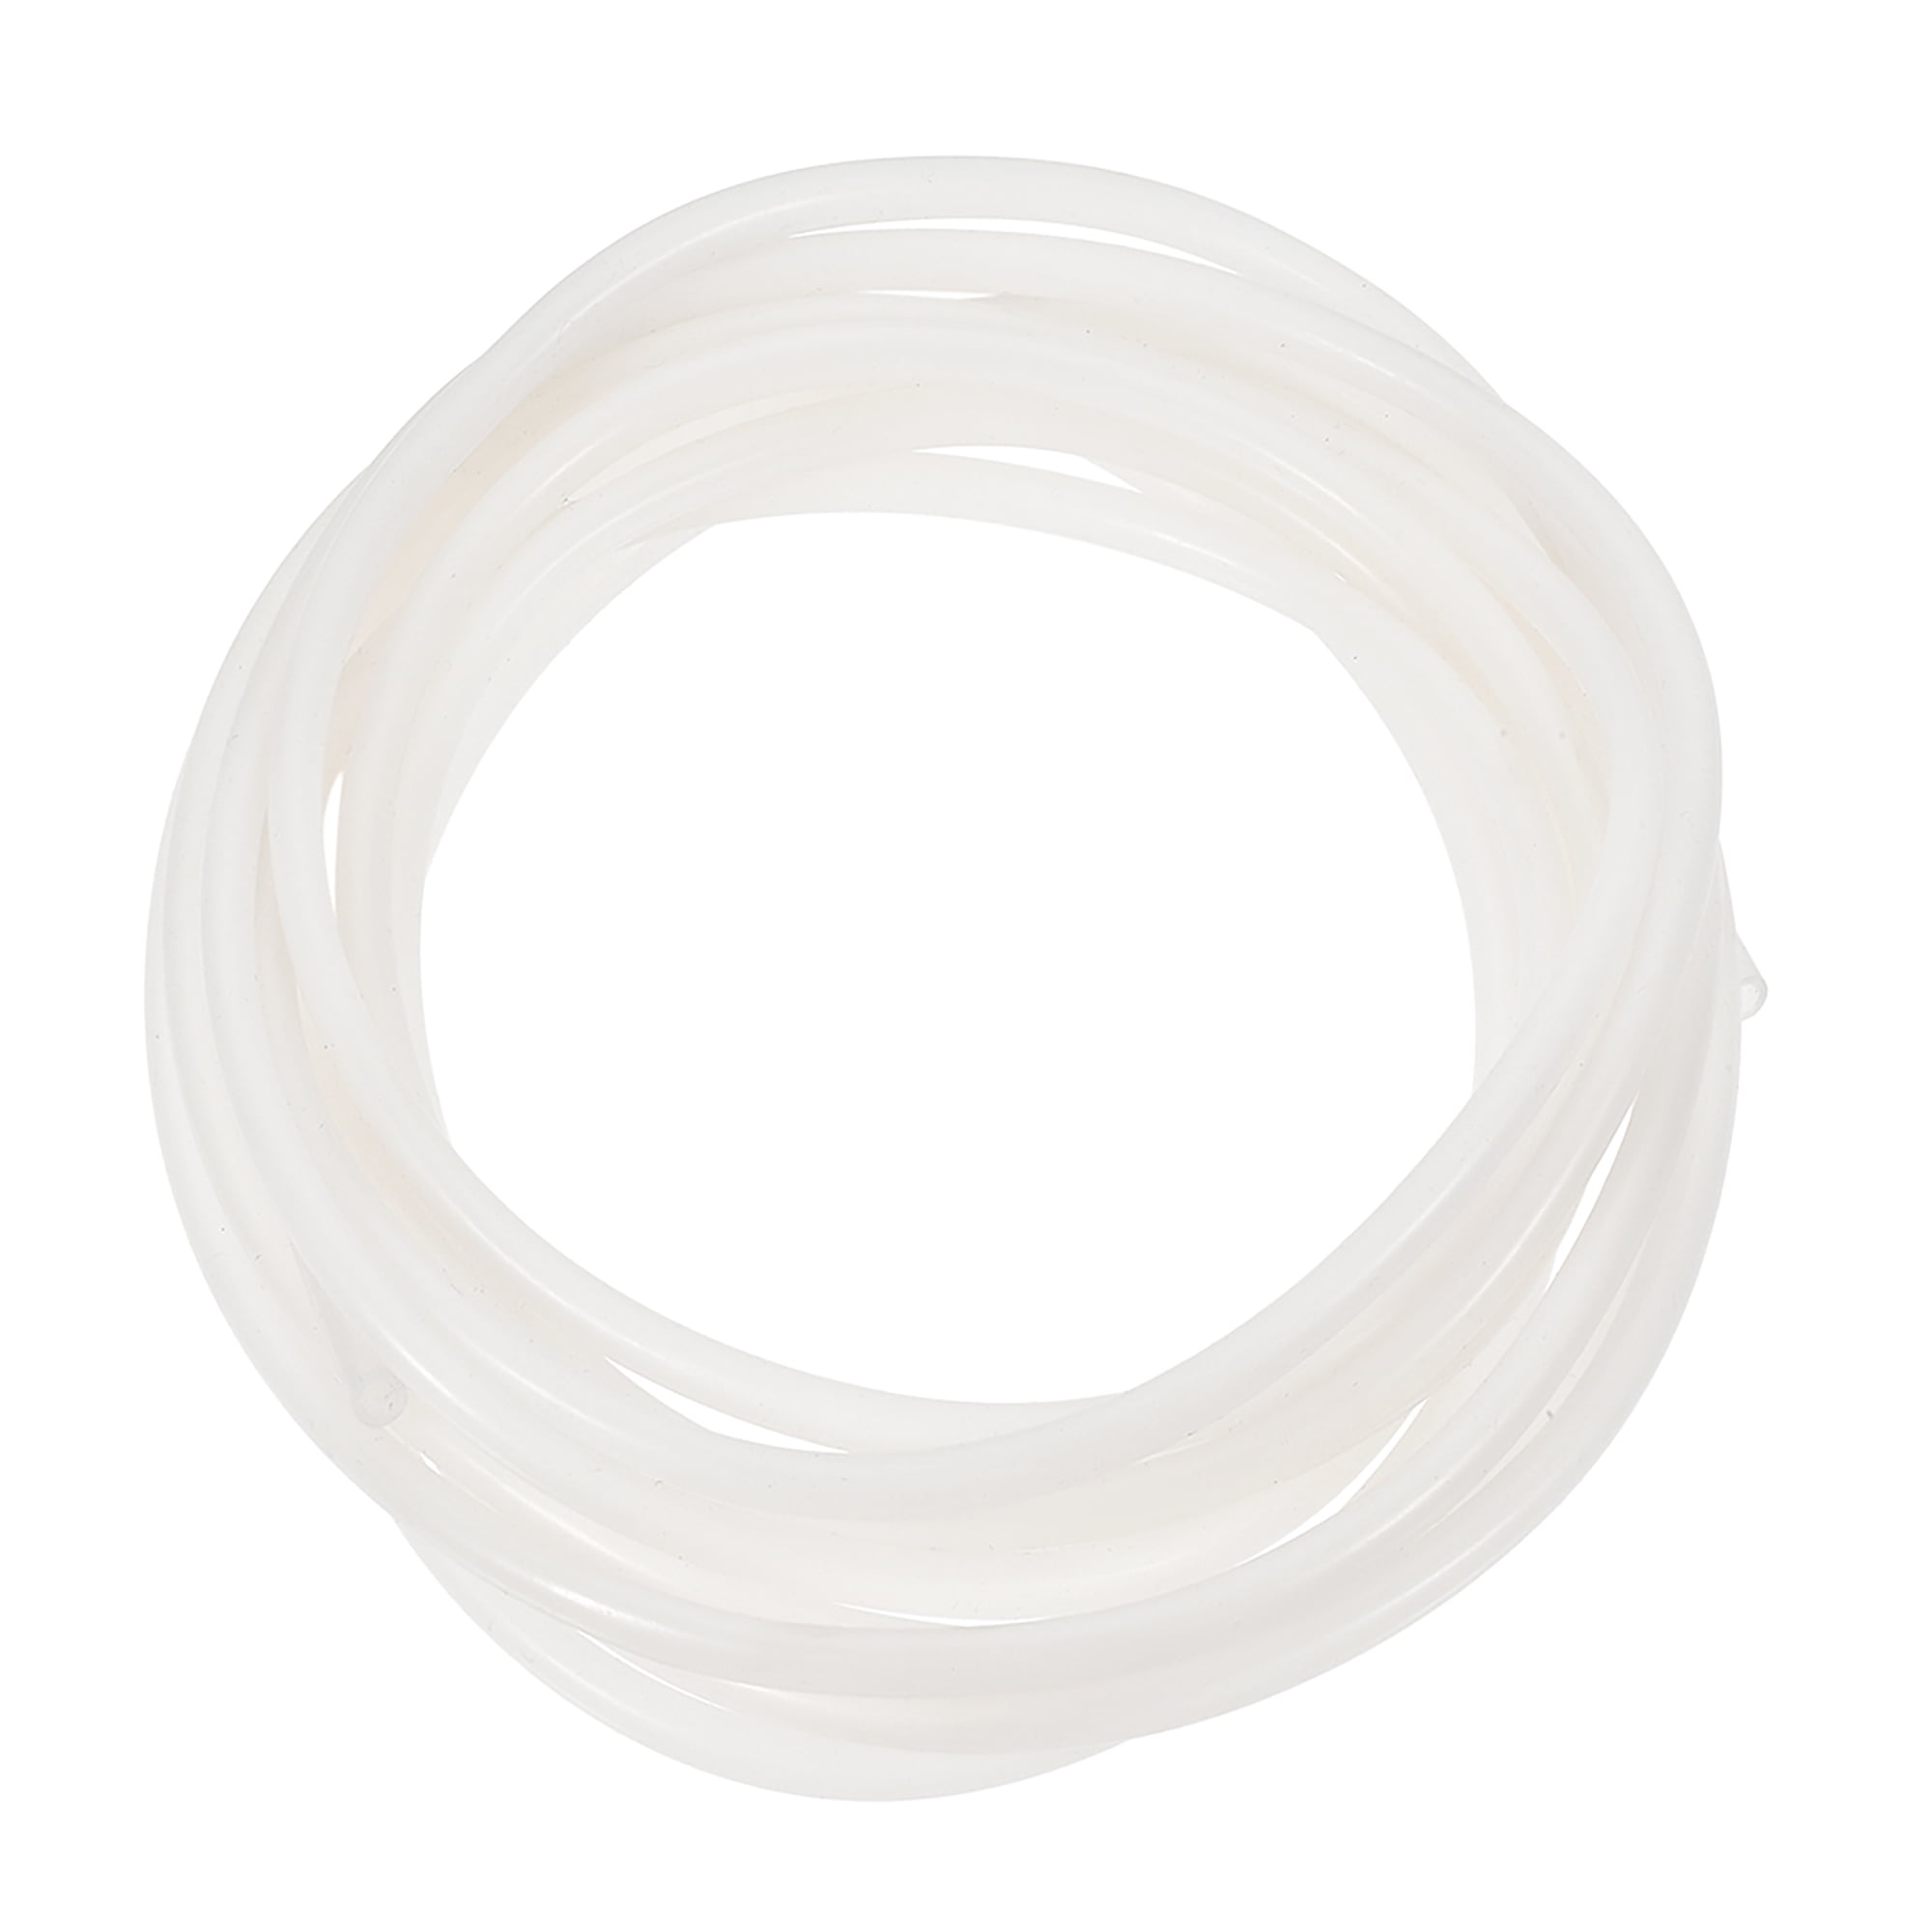 5M 10M 1/4" 3/8" Out Diameter RO Water White Flexible Tube Pipe Hose 